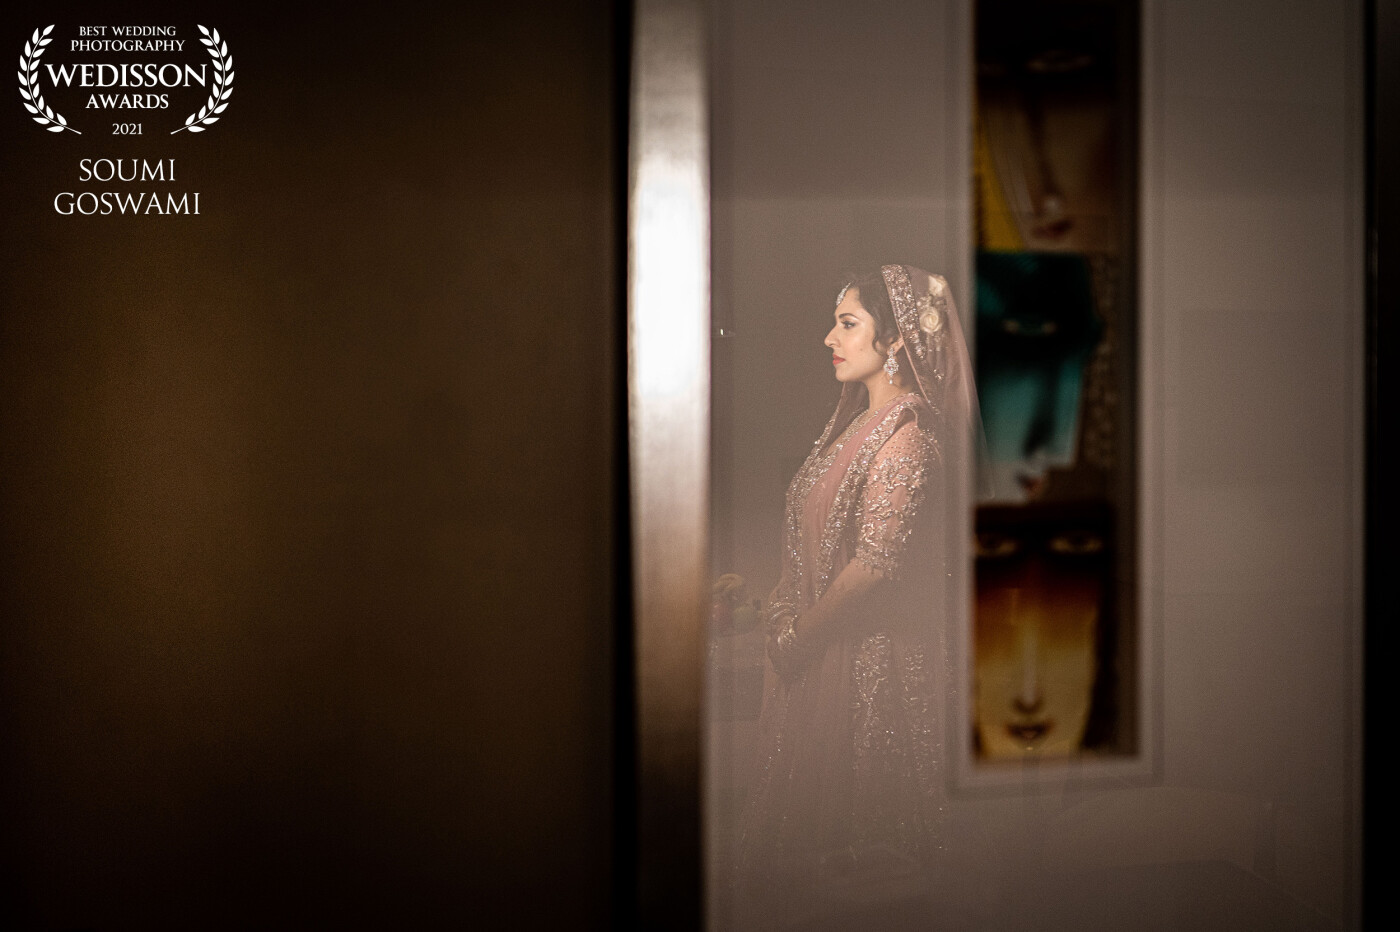 This wedding was really special, it was our last wedding before covid-19 entered and disrupted our lives last year. Our bride Jehan was getting ready for her walima function, and documented her through this painting in her room at Taj Lands End. Making use of what's available in the vicinity and creating memories:)